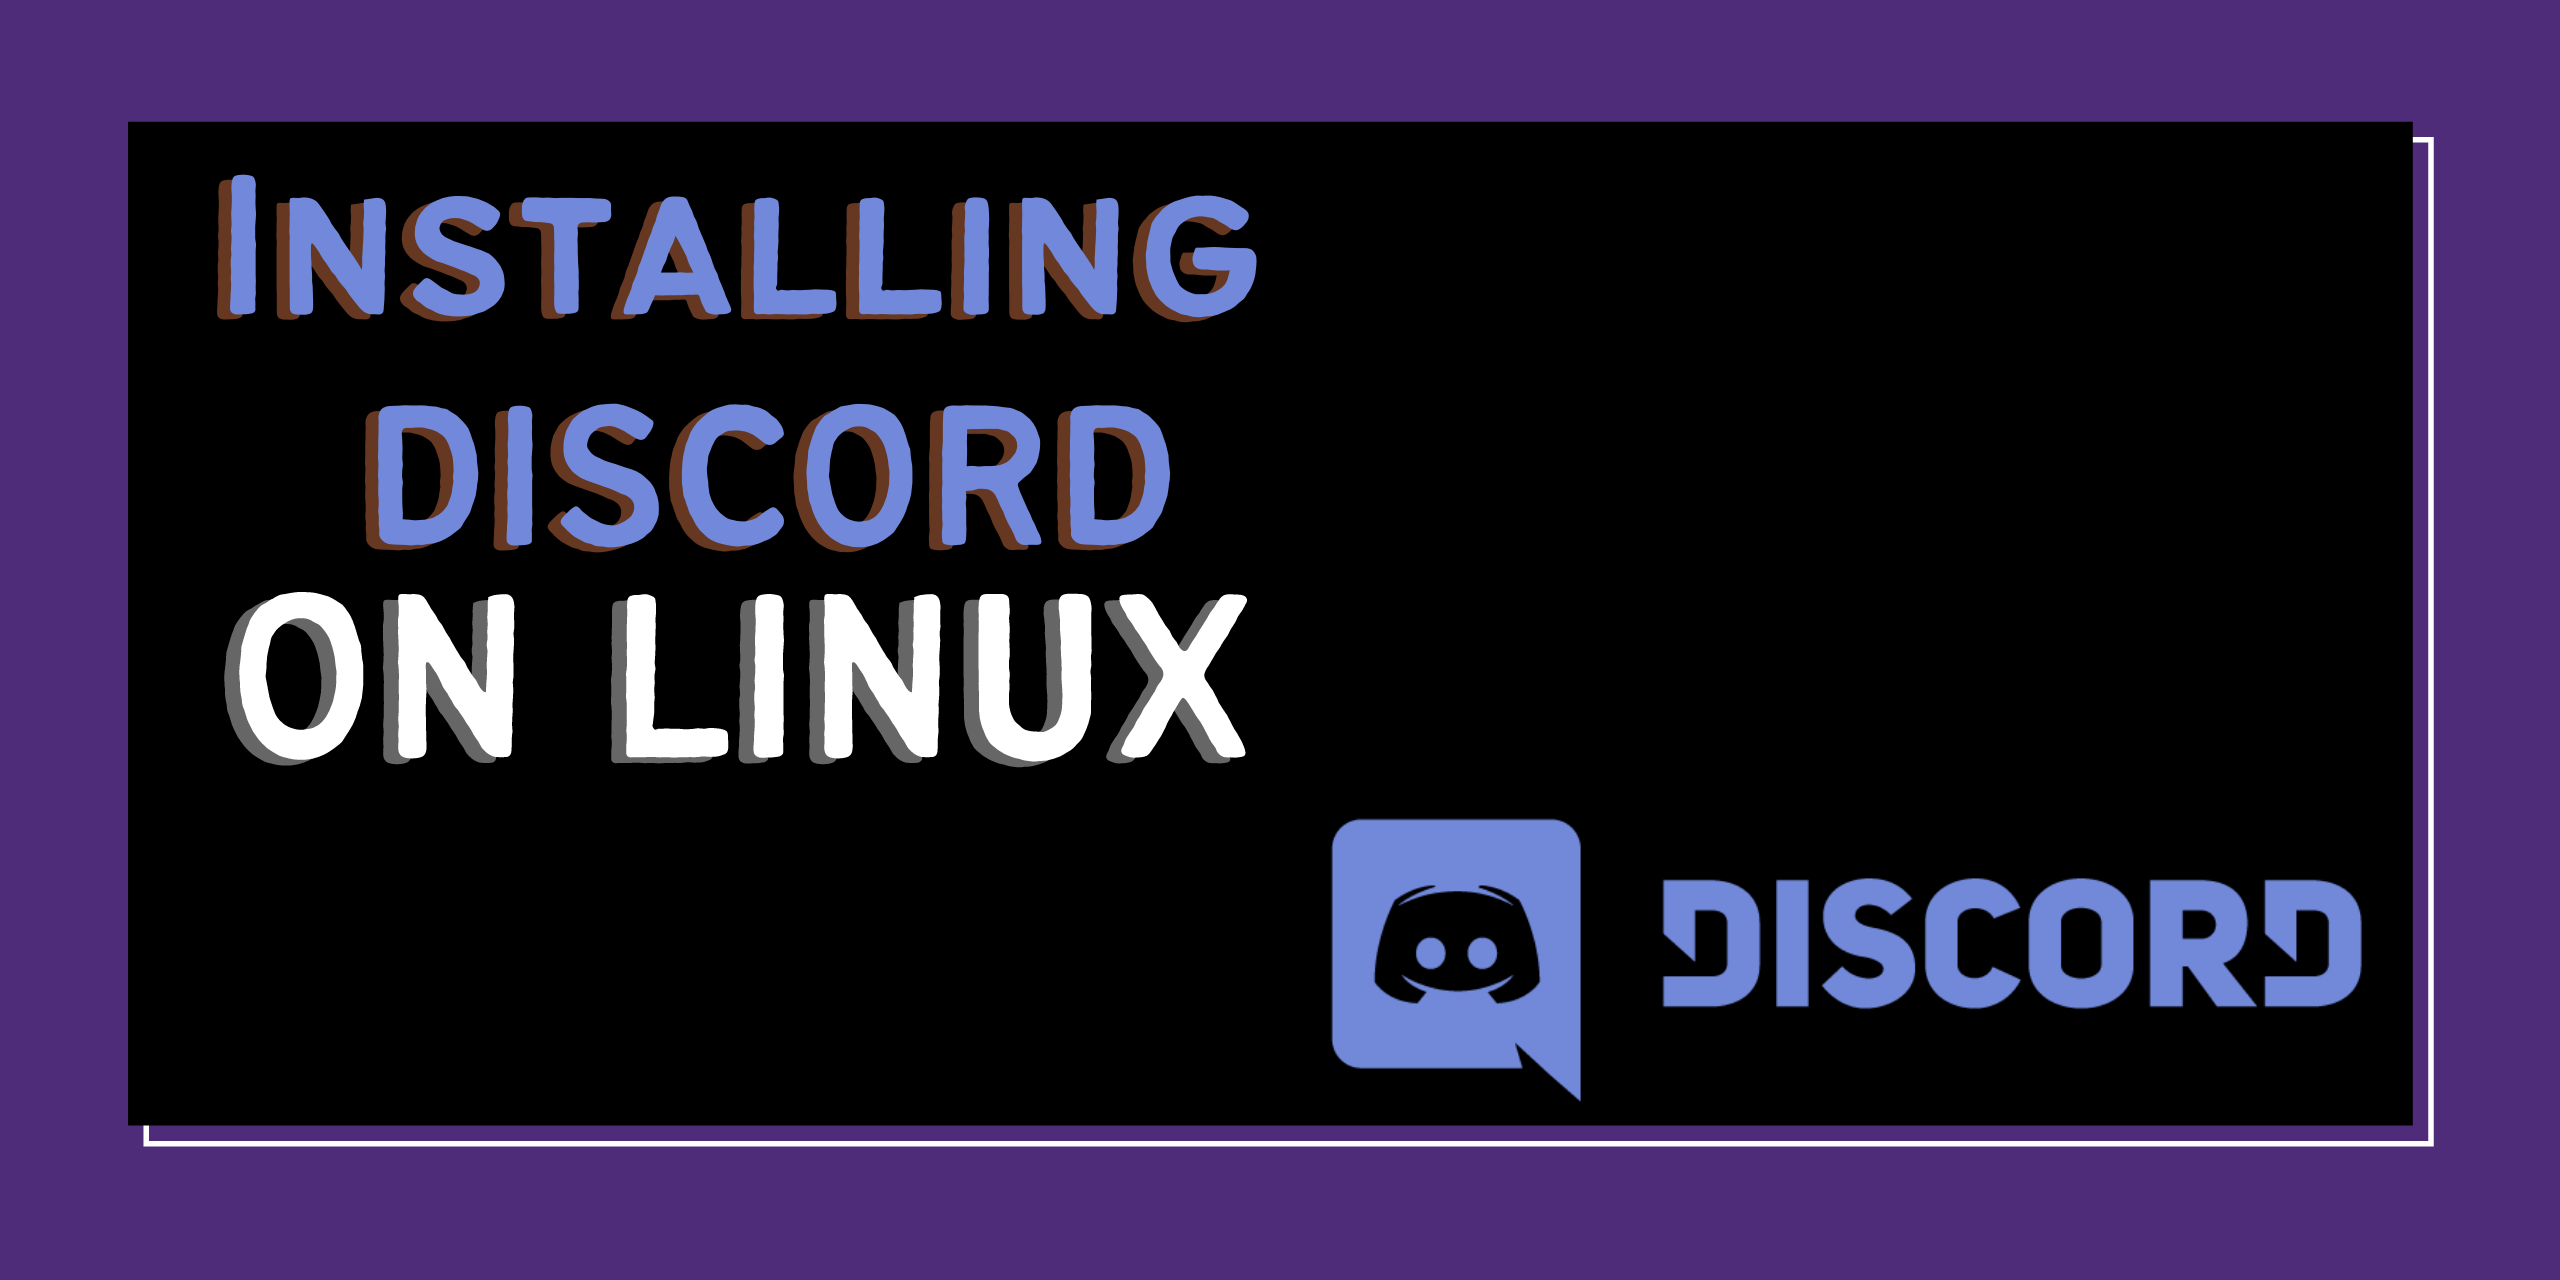 How to Install Discord in Linux - GeeksforGeeks